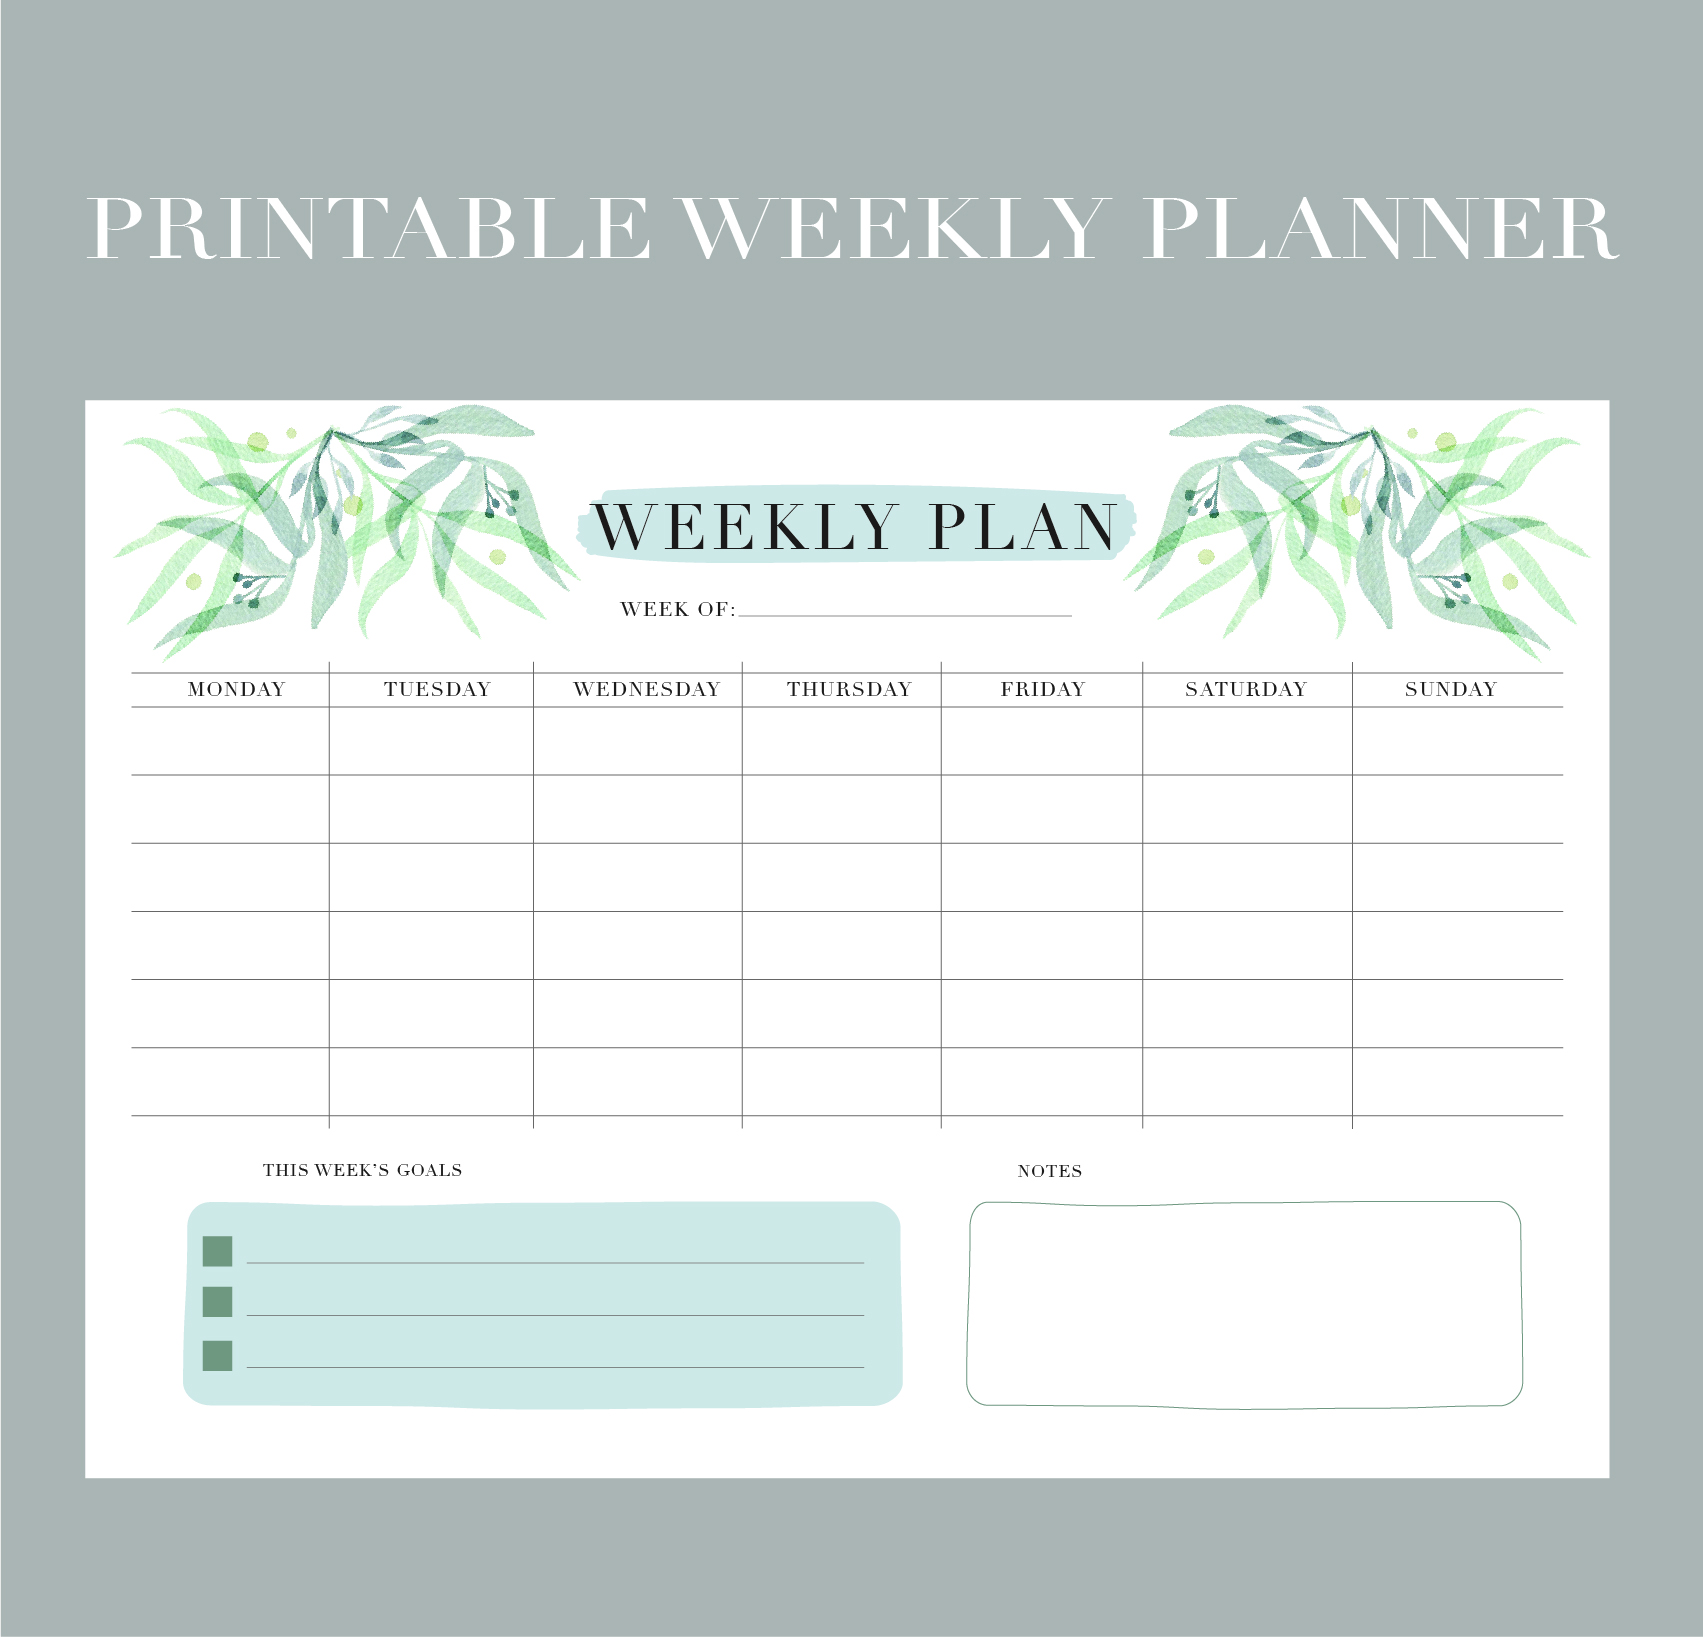 Weekly Planner - Averly Saint